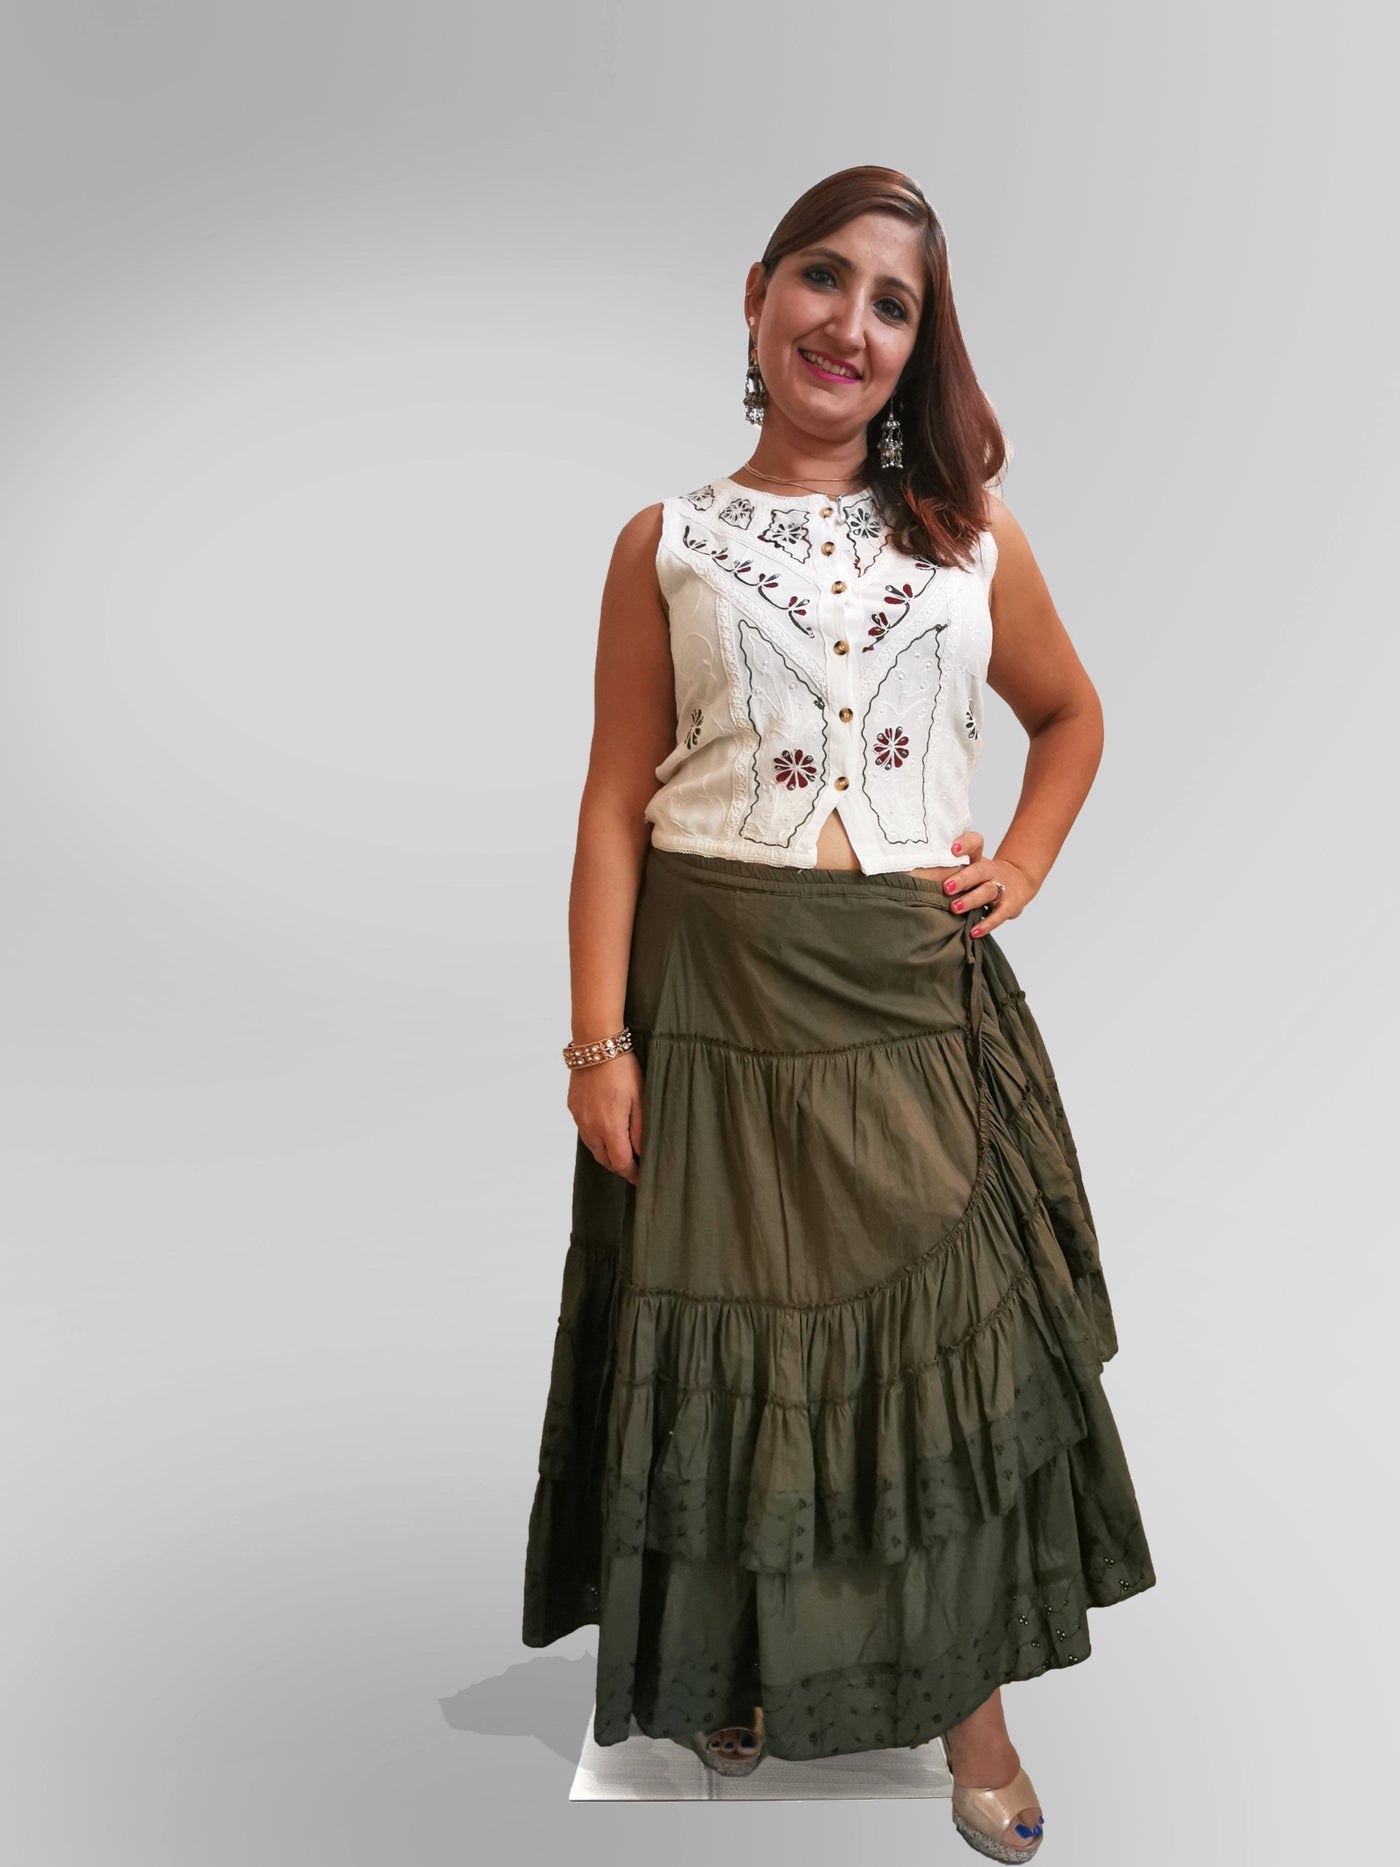 Sleeveless Blouse and Skirt Set - Indian Clothing in Denver, CO, Aurora, CO, Boulder, CO, Fort Collins, CO, Colorado Springs, CO, Parker, CO, Highlands Ranch, CO, Cherry Creek, CO, Centennial, CO, and Longmont, CO. Nationwide shipping USA - India Fashion X